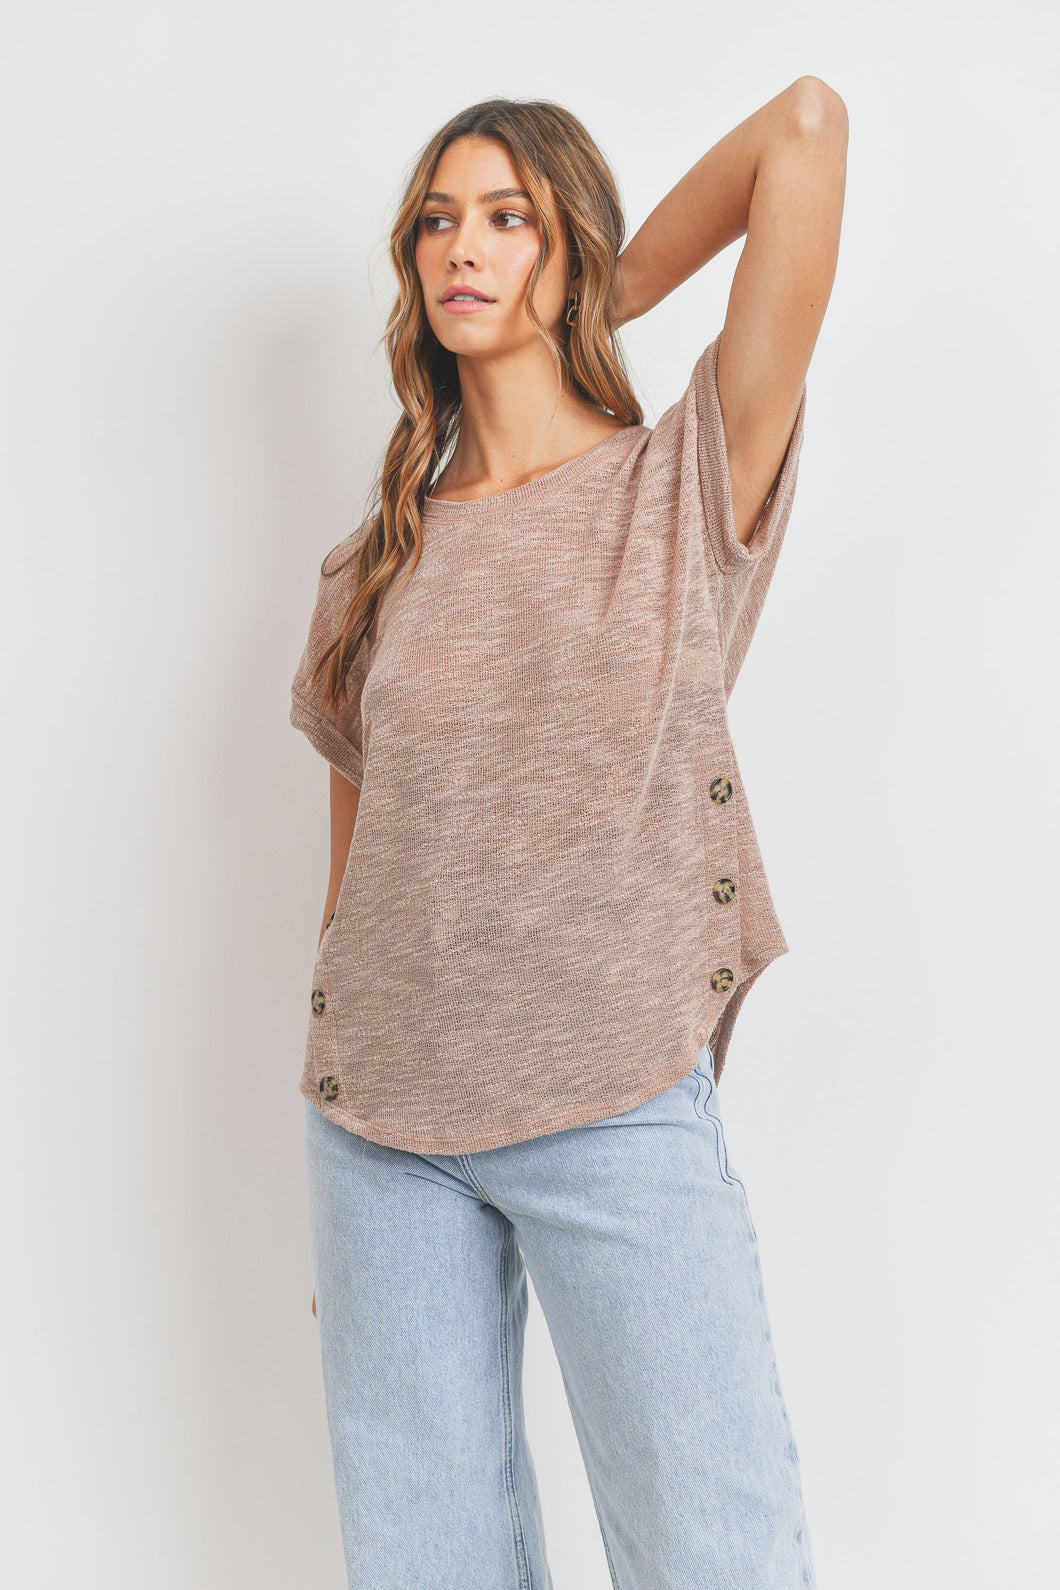 Rose Dolman Sleeves with Buttons Knit Top